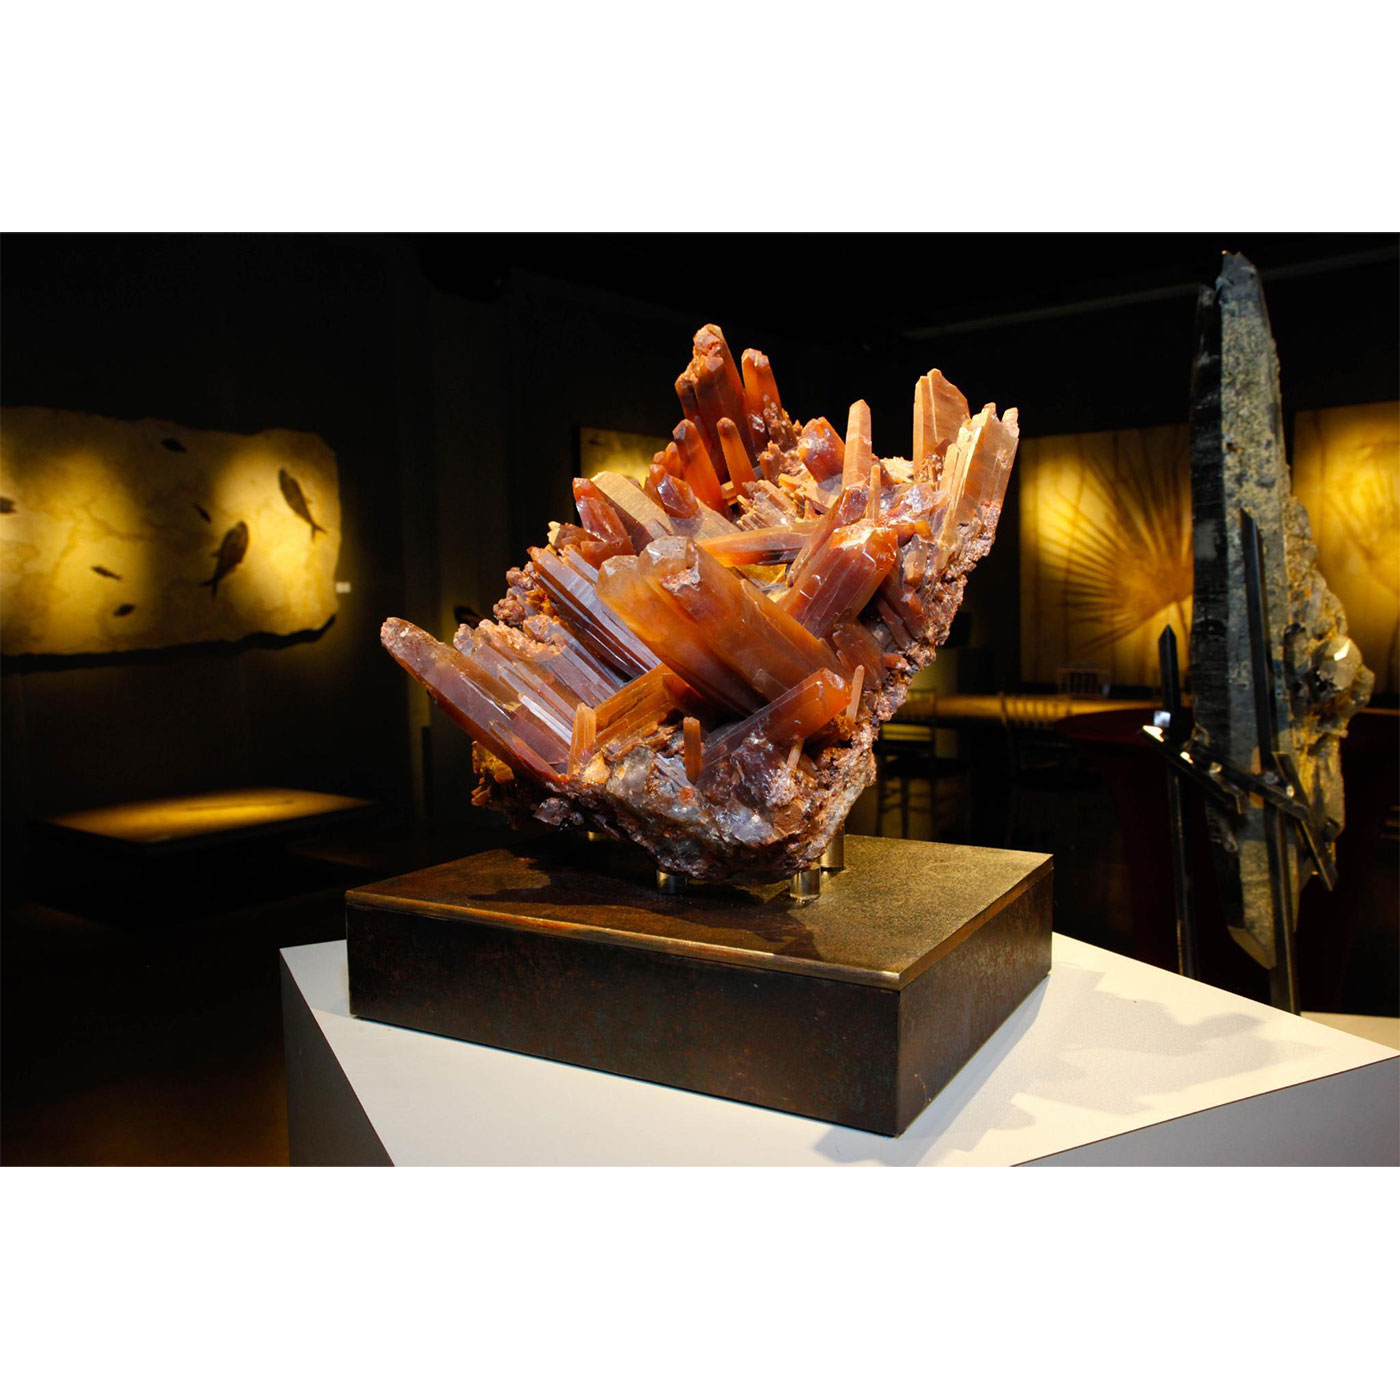 RED QUARTZ TERMINATED CRYSTAL CLUSTER ON BASE - Image 3 of 5